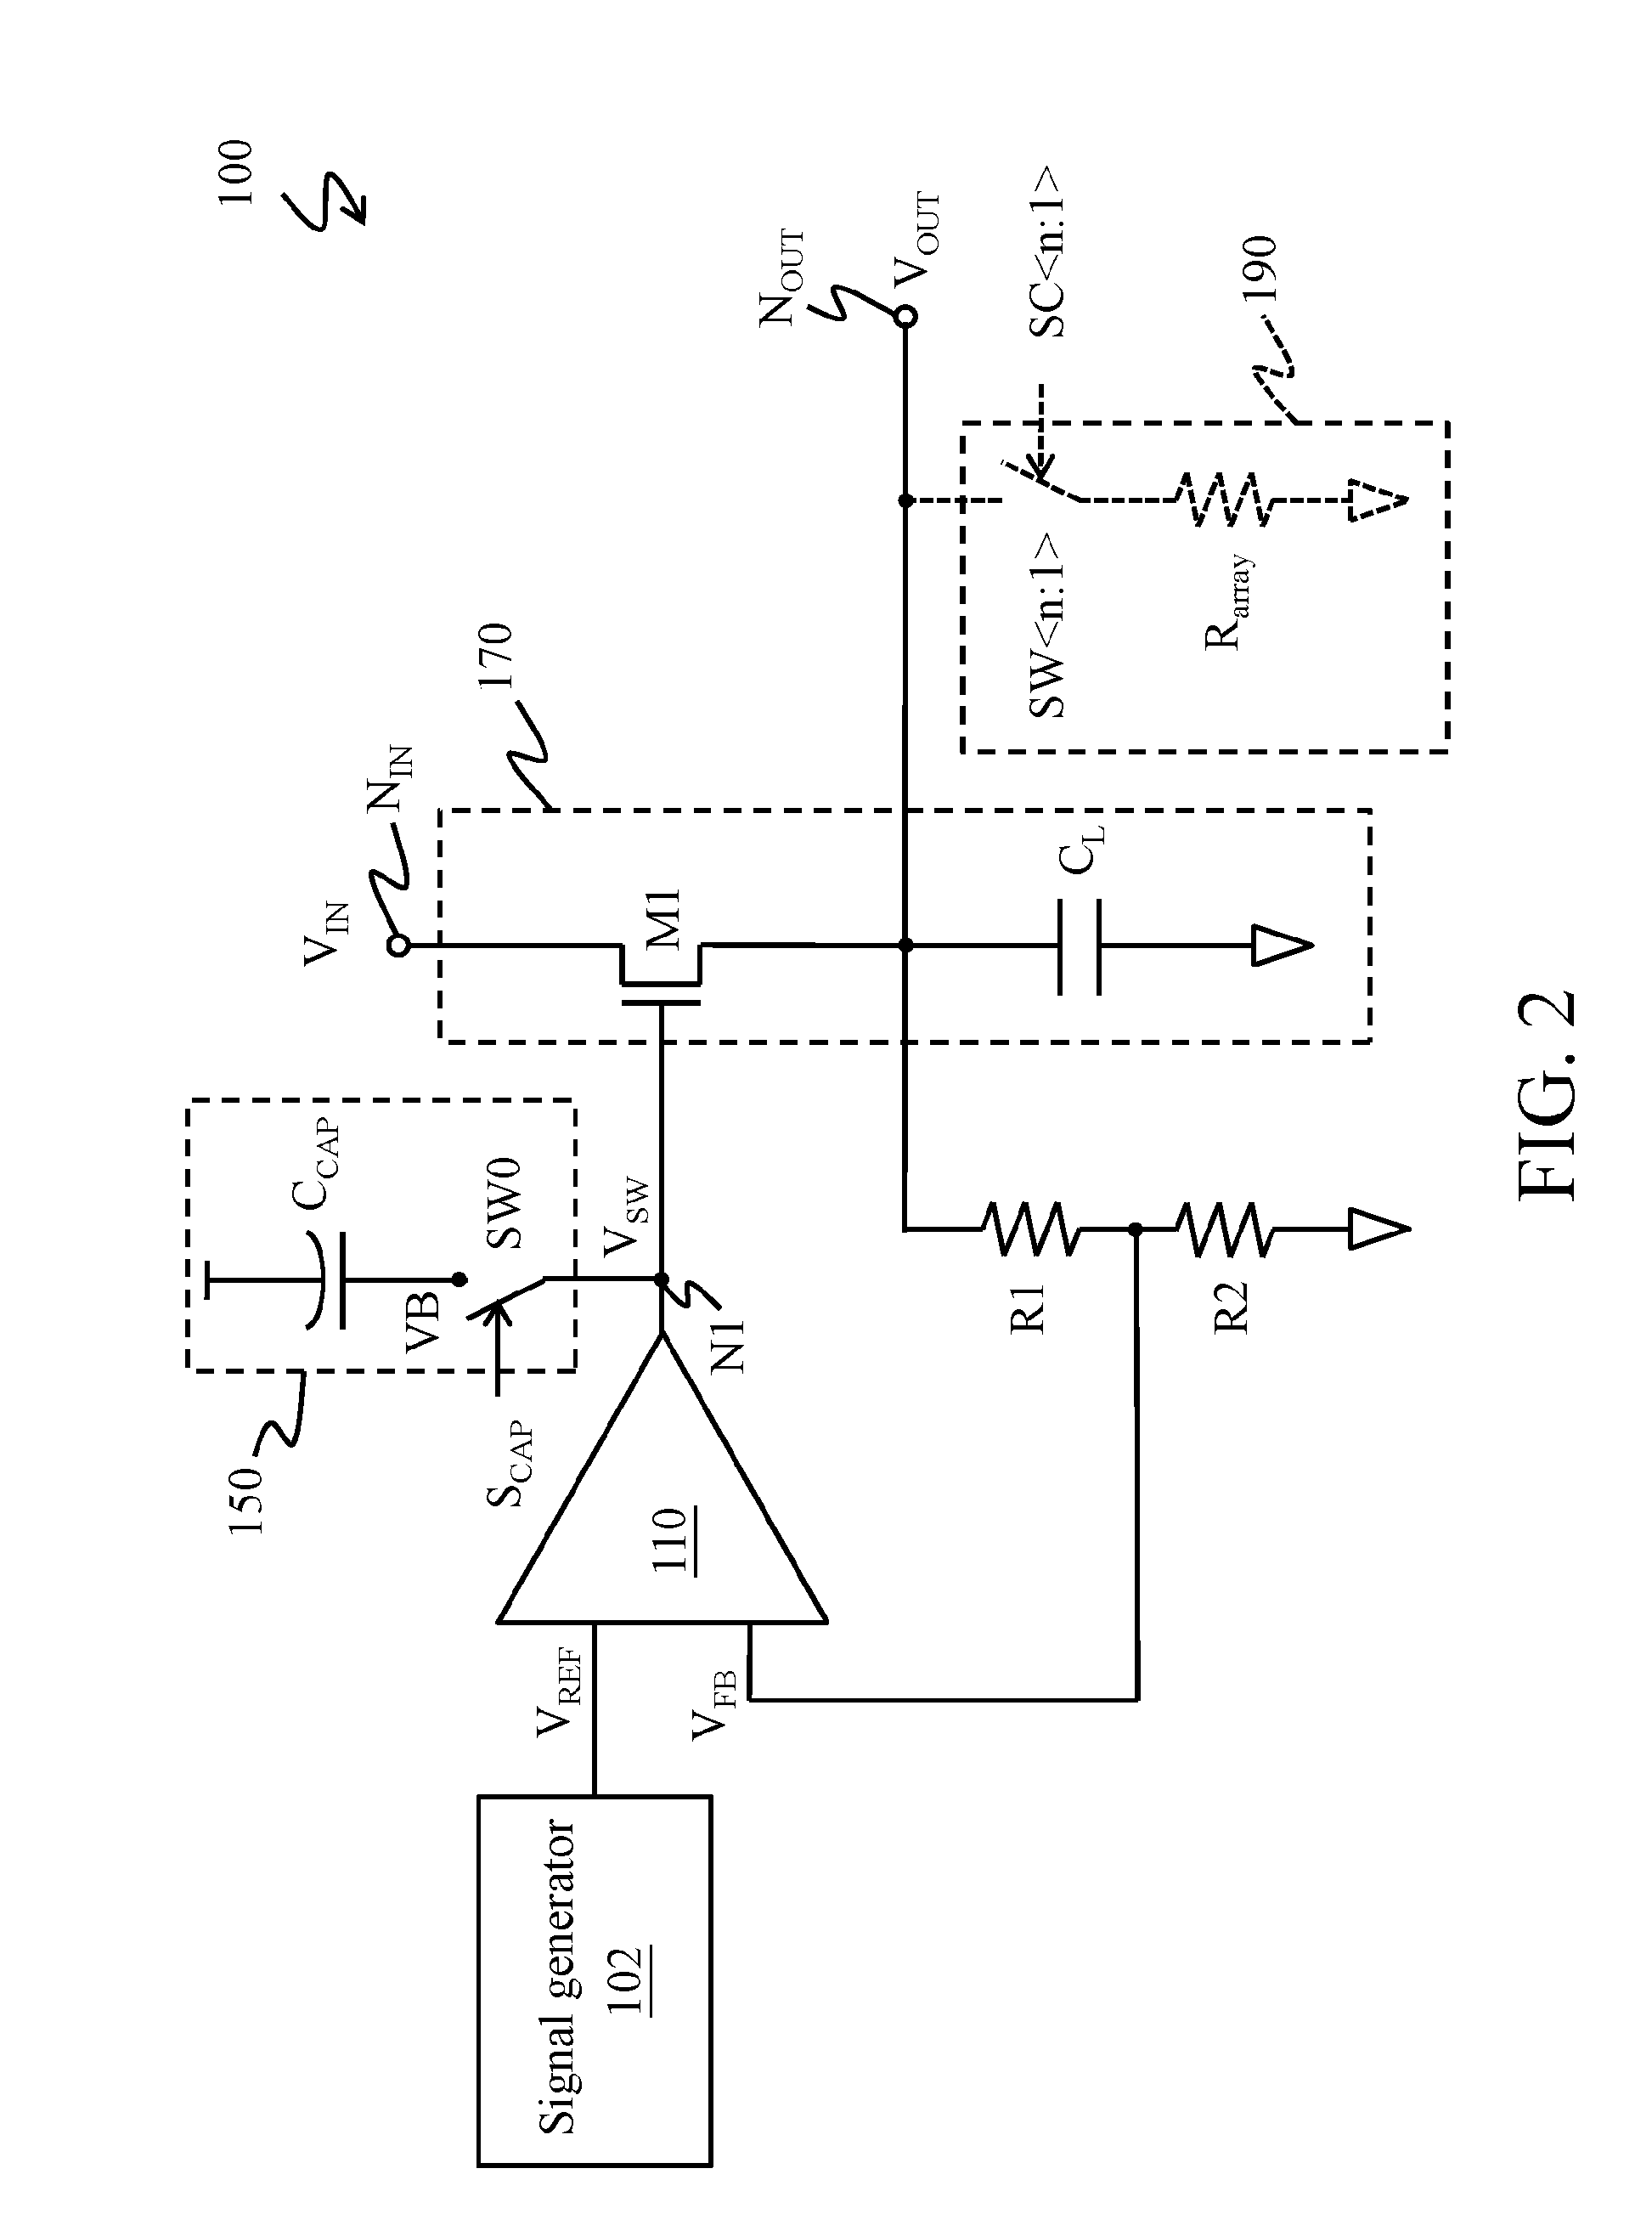 Voltage regulating circuit and method thereof